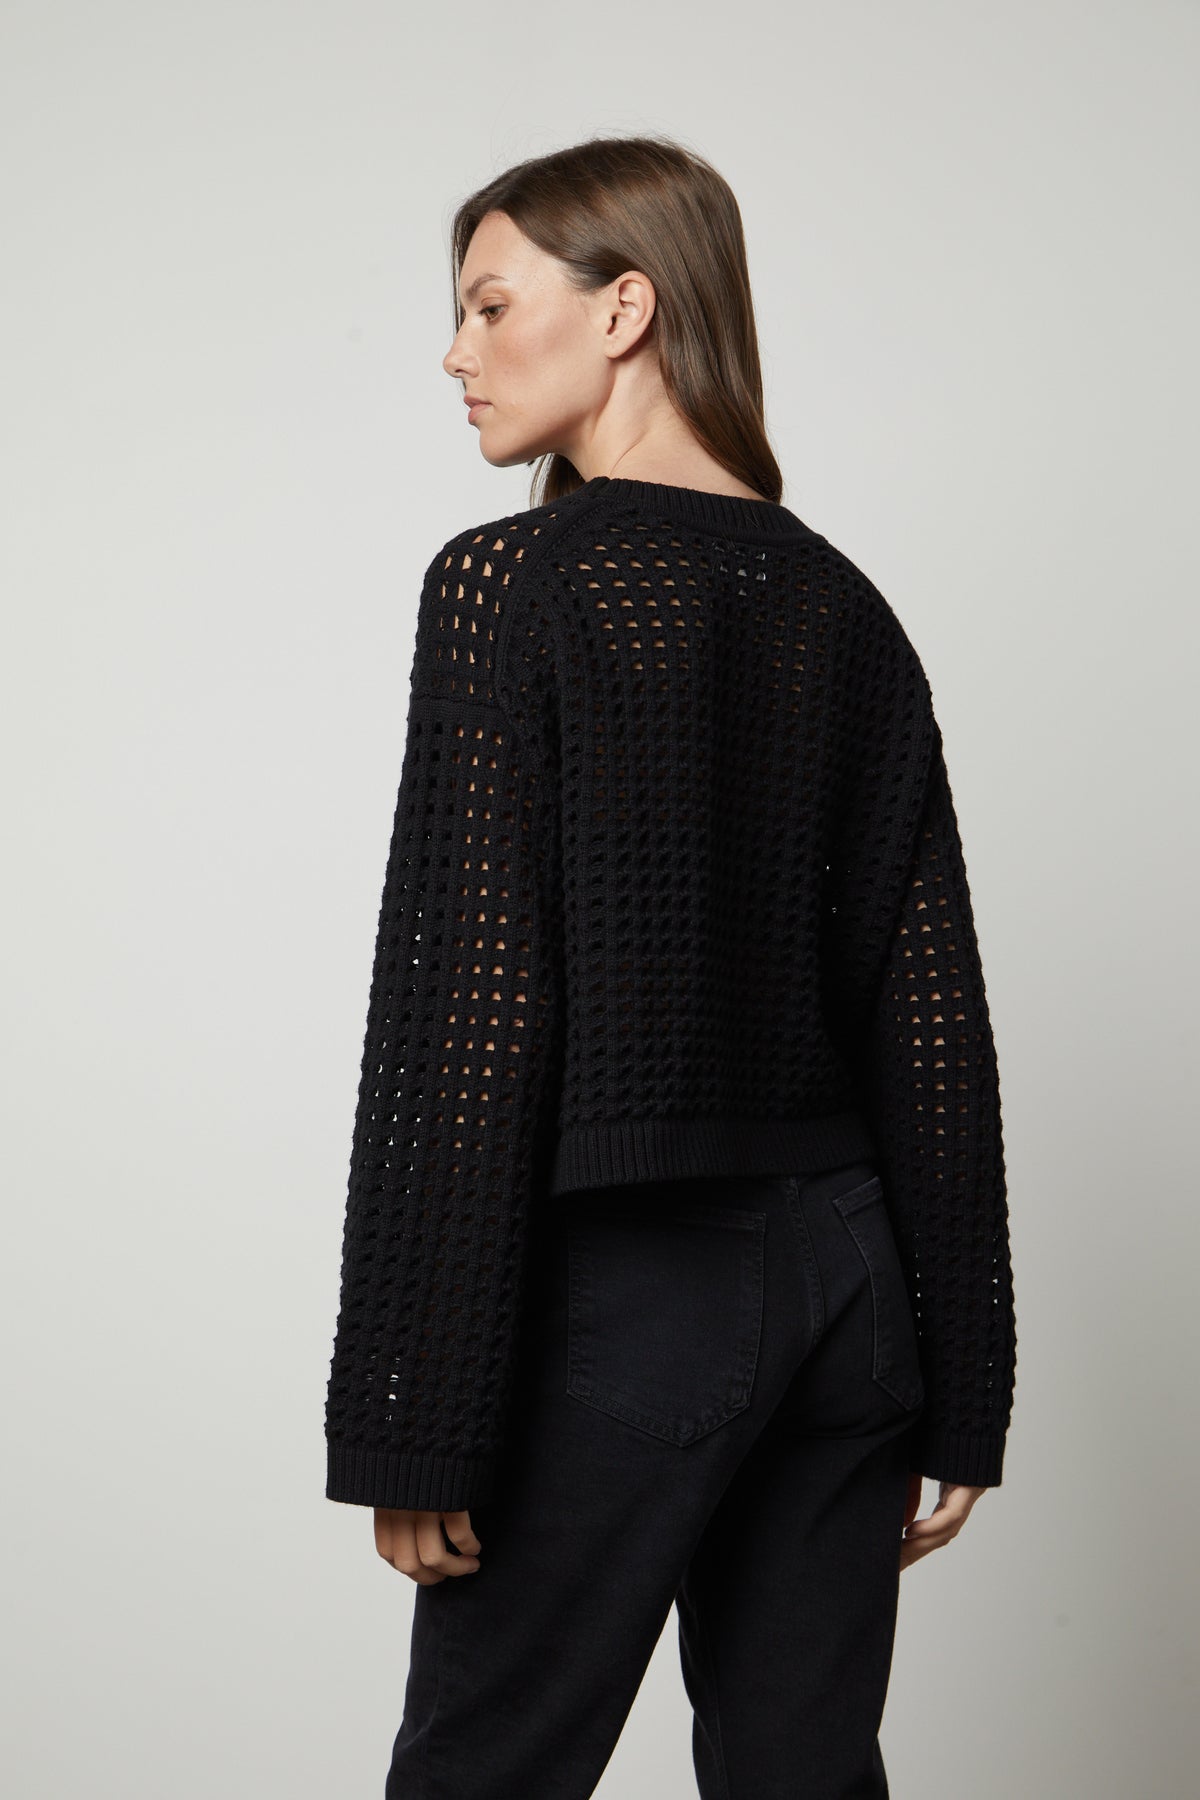 The back view of a woman wearing a Velvet by Graham & Spencer SAMMIE MESH KNIT CREW NECK SWEATER.-26910428725441